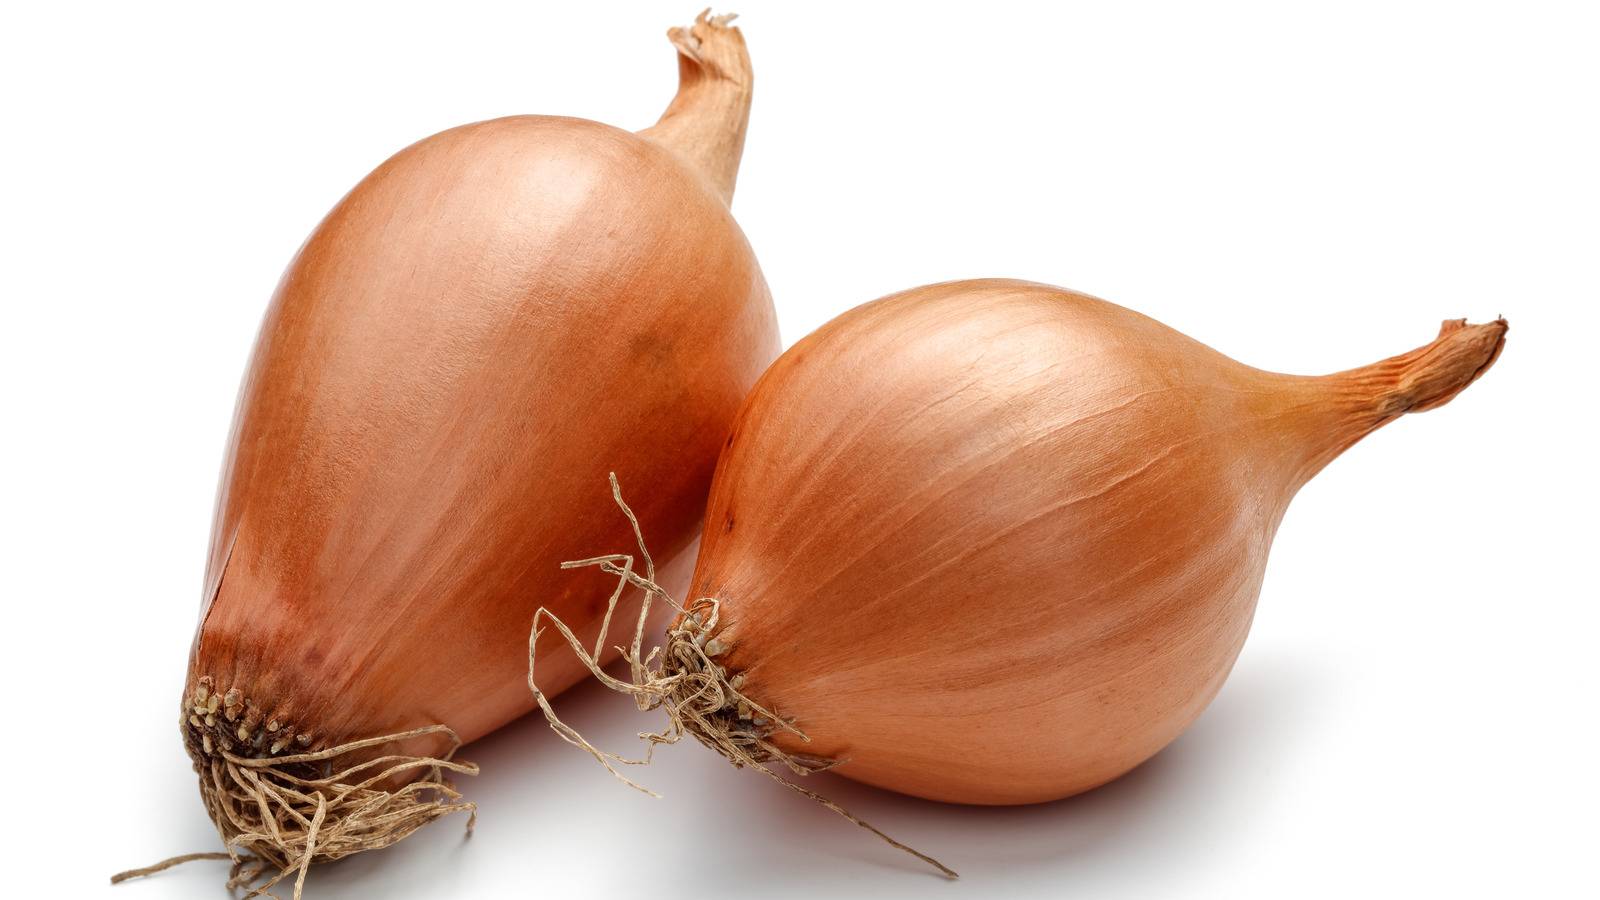 What Are Shallots?